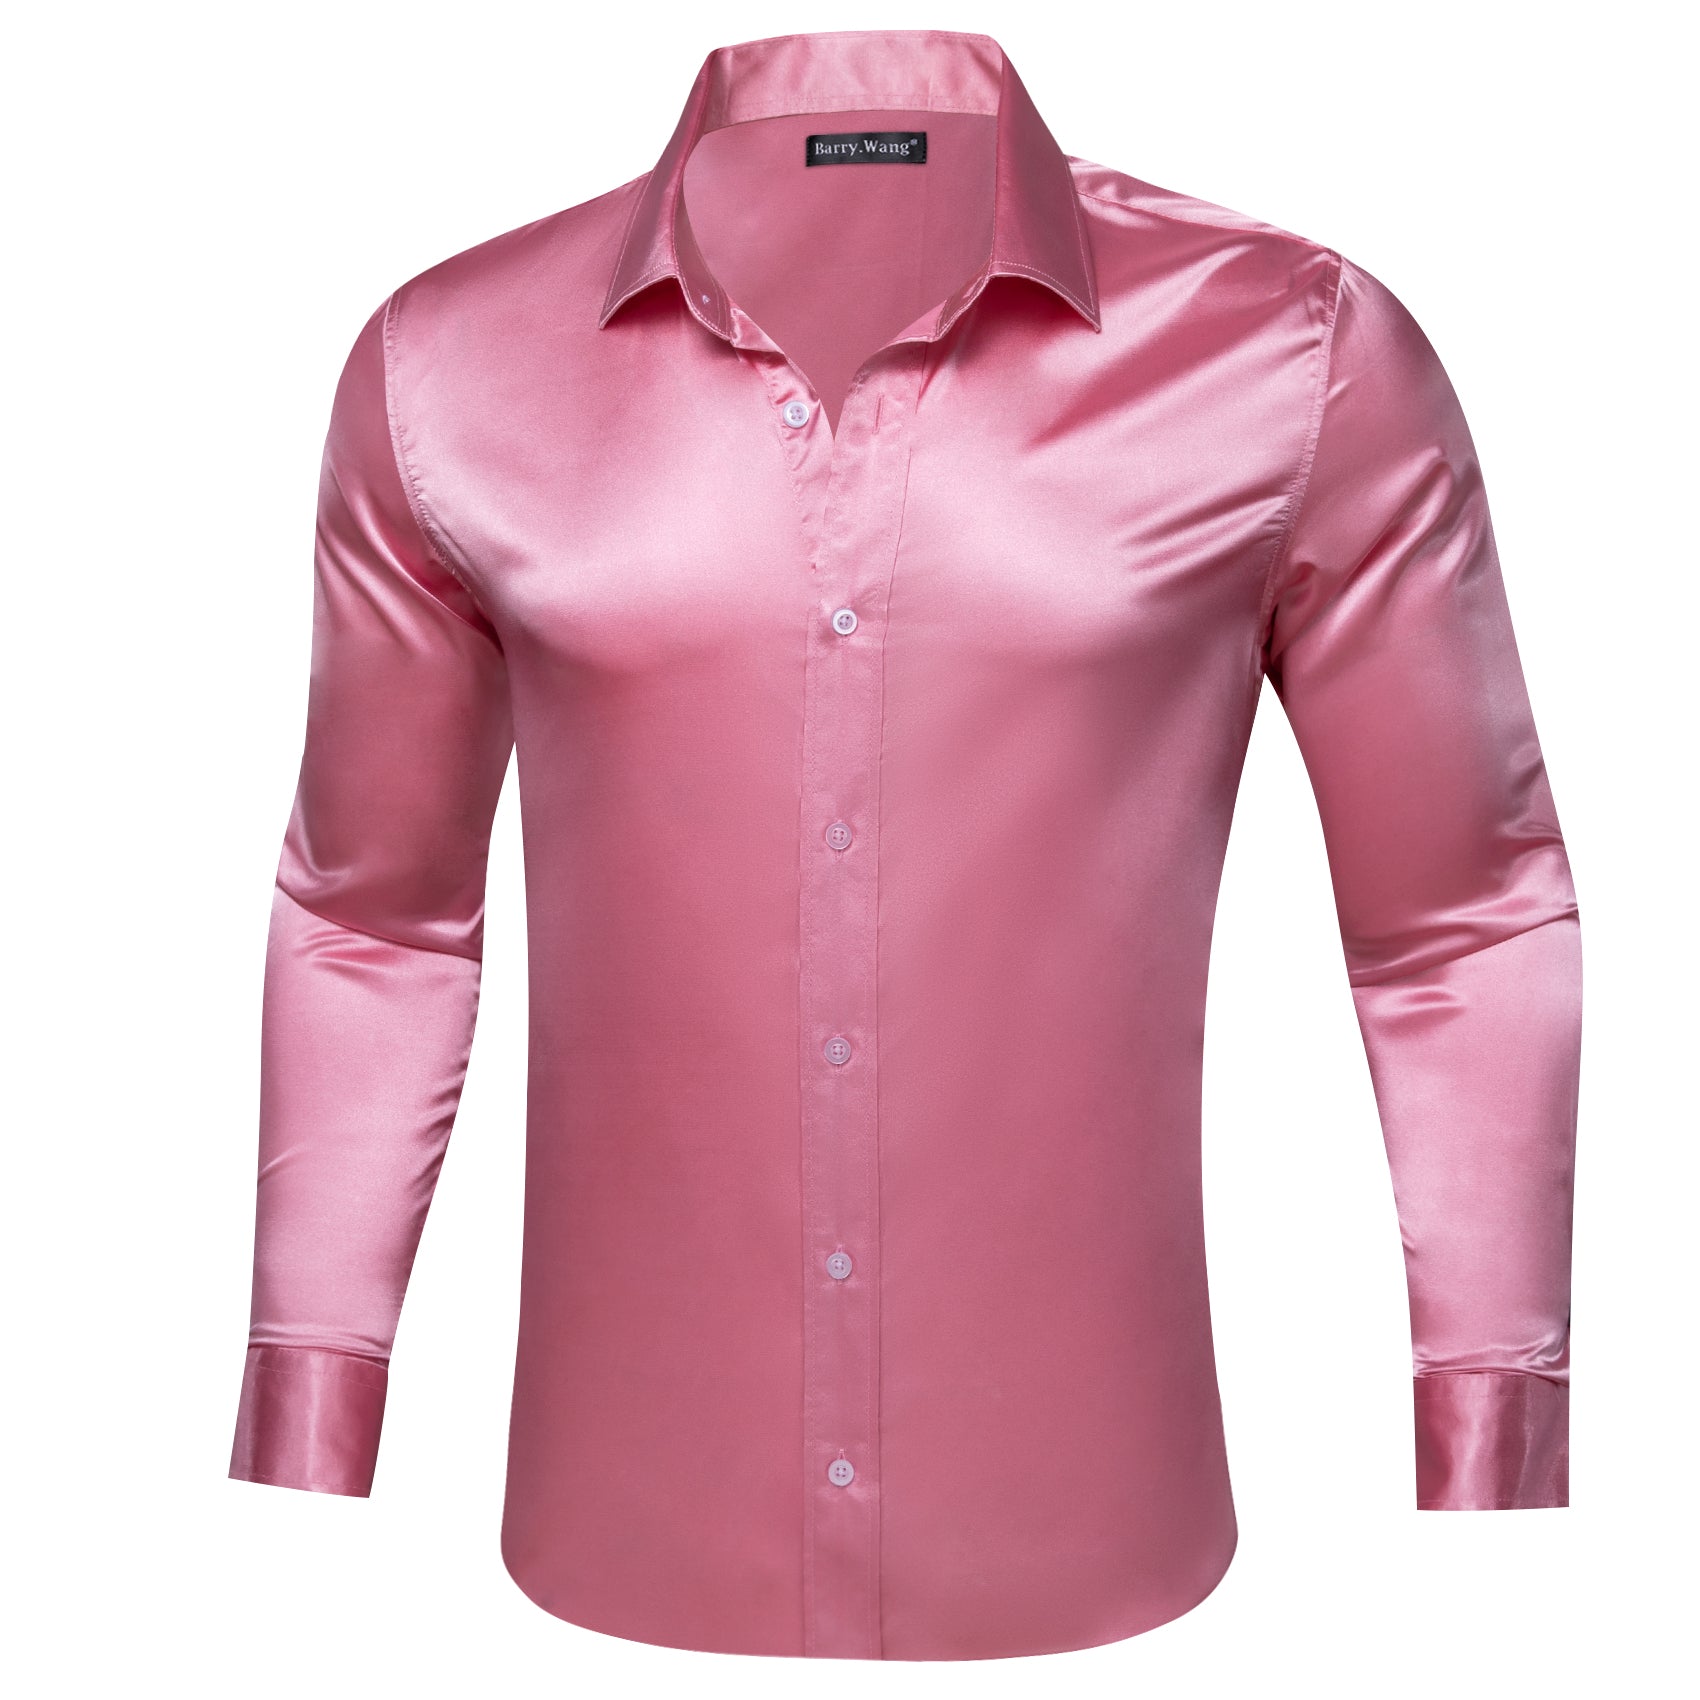 Barry.wang Pale Violet Red Solid Silk Shirt